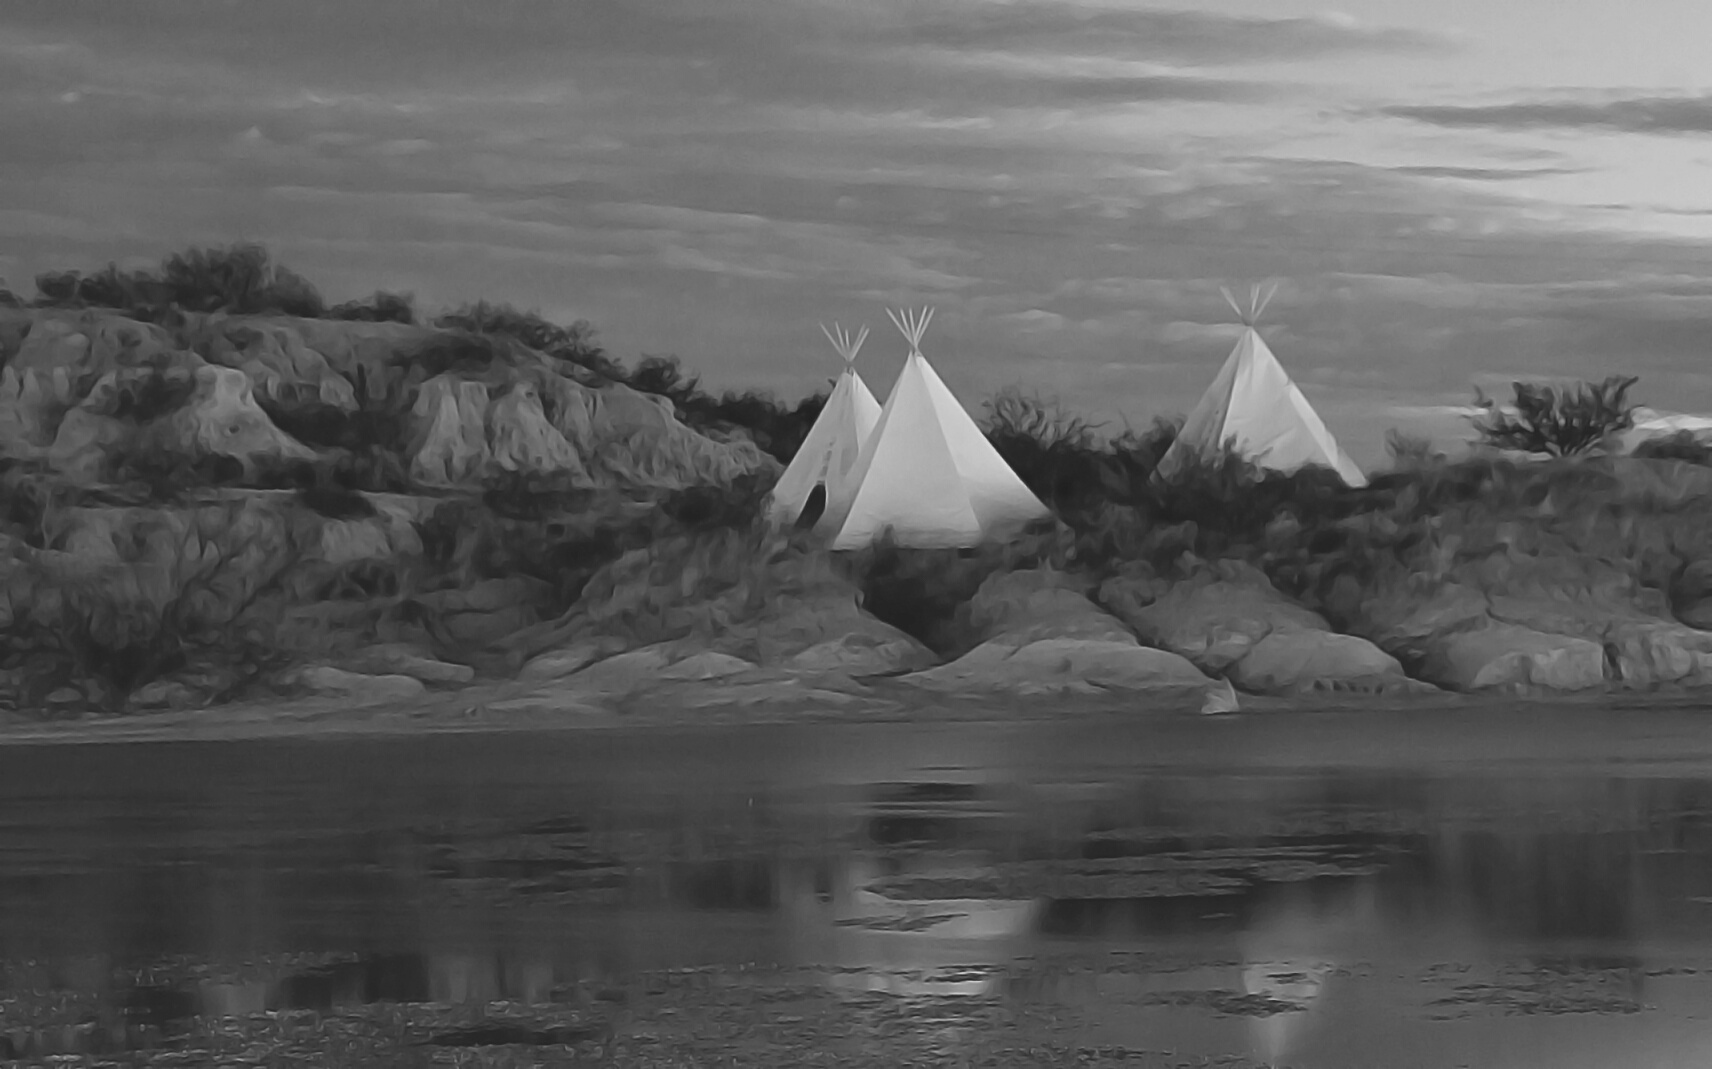 Night Photo of Native American Teepees